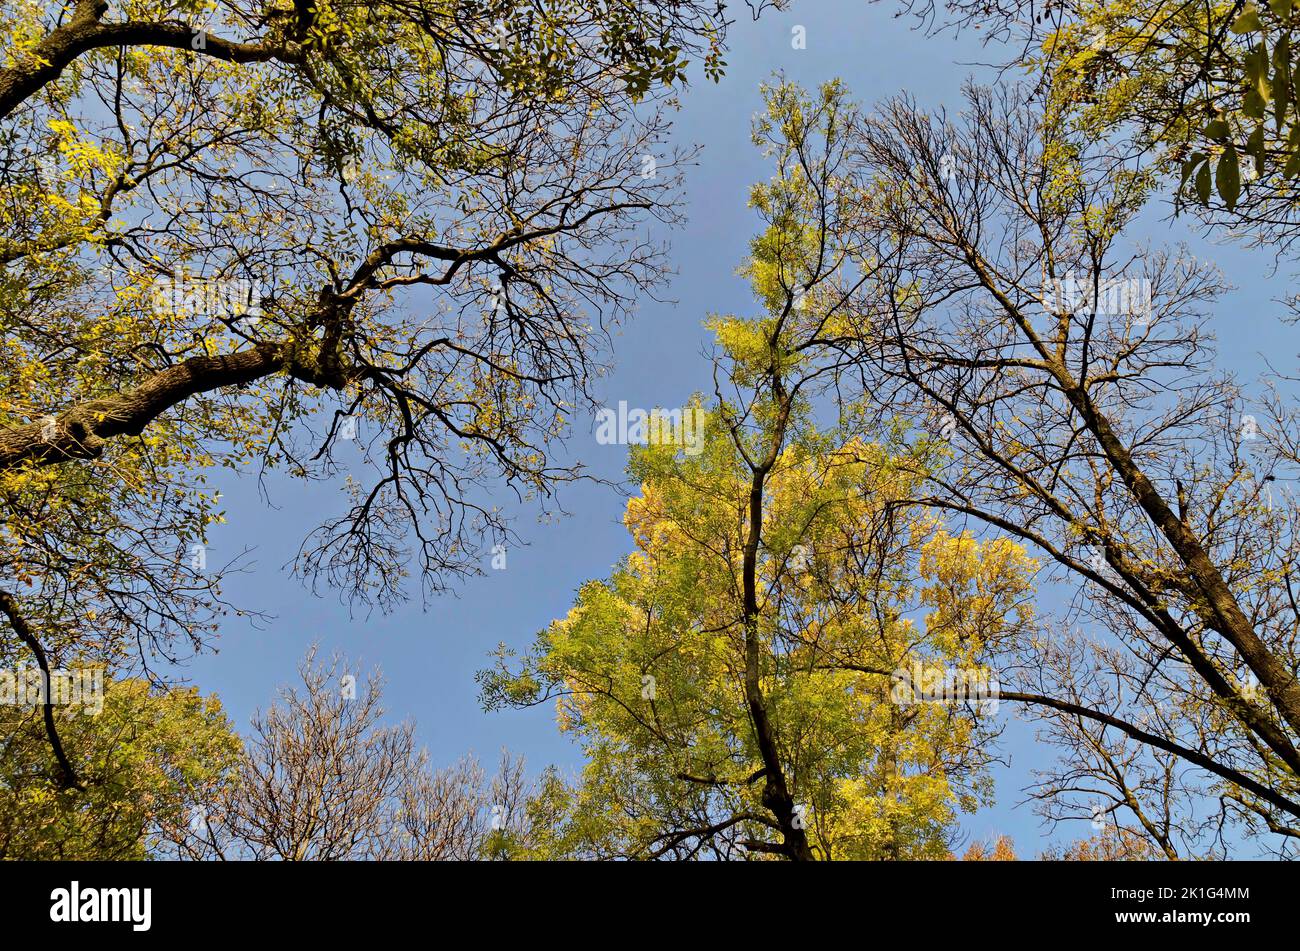 View of the tops of a colorful autumn forest with beautiful branched trees with lots of yellow, green and brown leaves, Sofia, Bulgaria Stock Photo